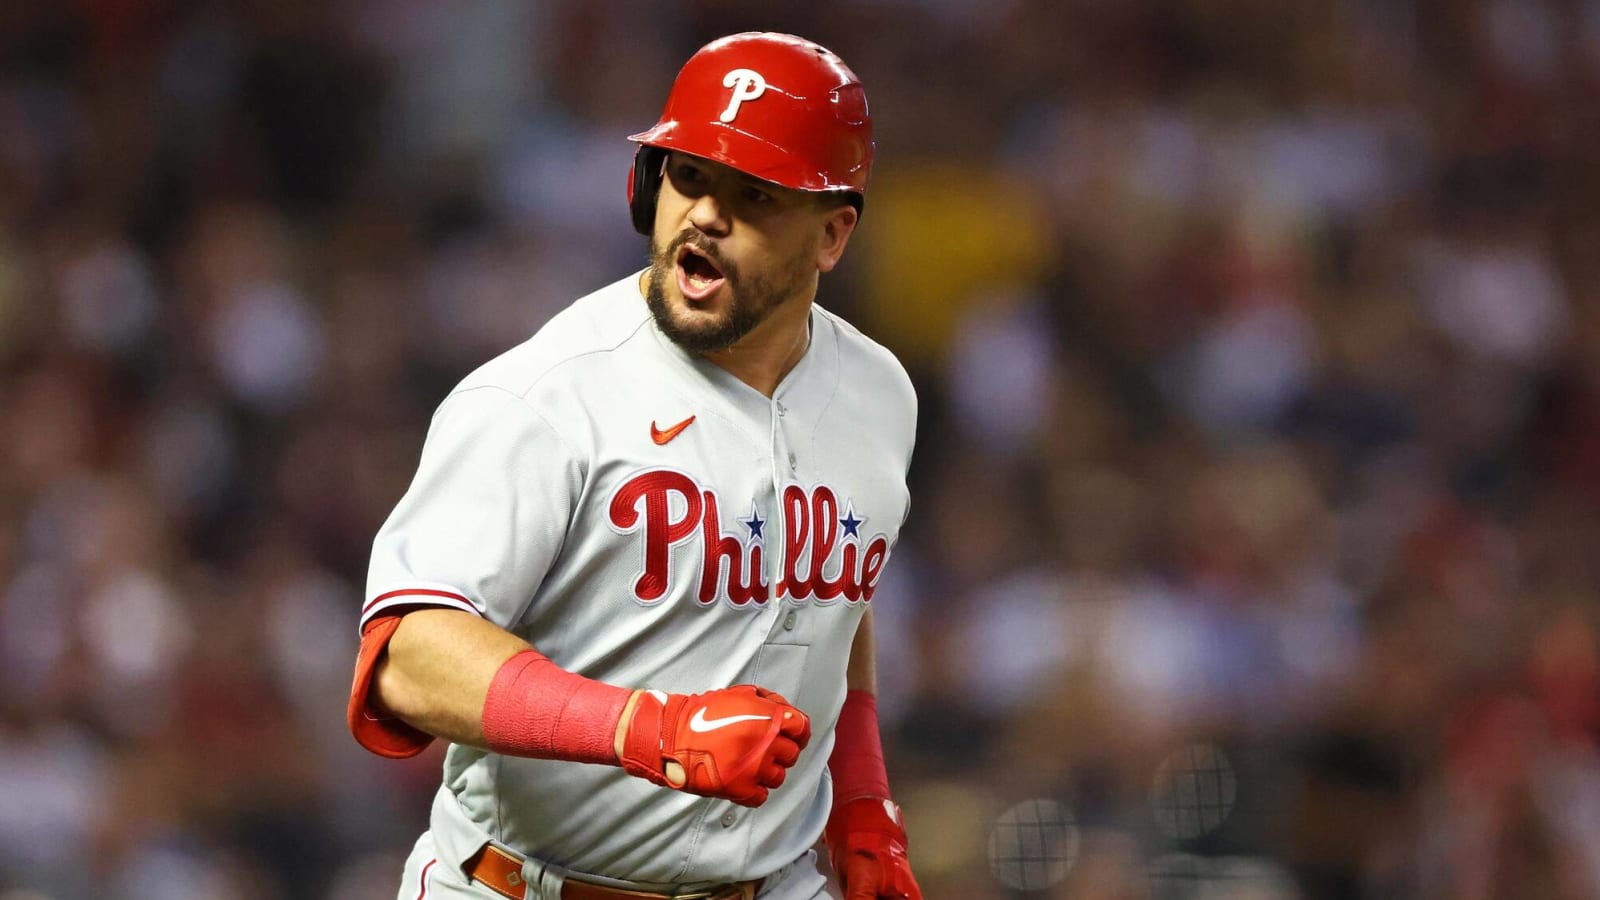 Watch: Phillies DH Kyle Schwarber smashes line-drive HR in Game 4, making impressive MLB history